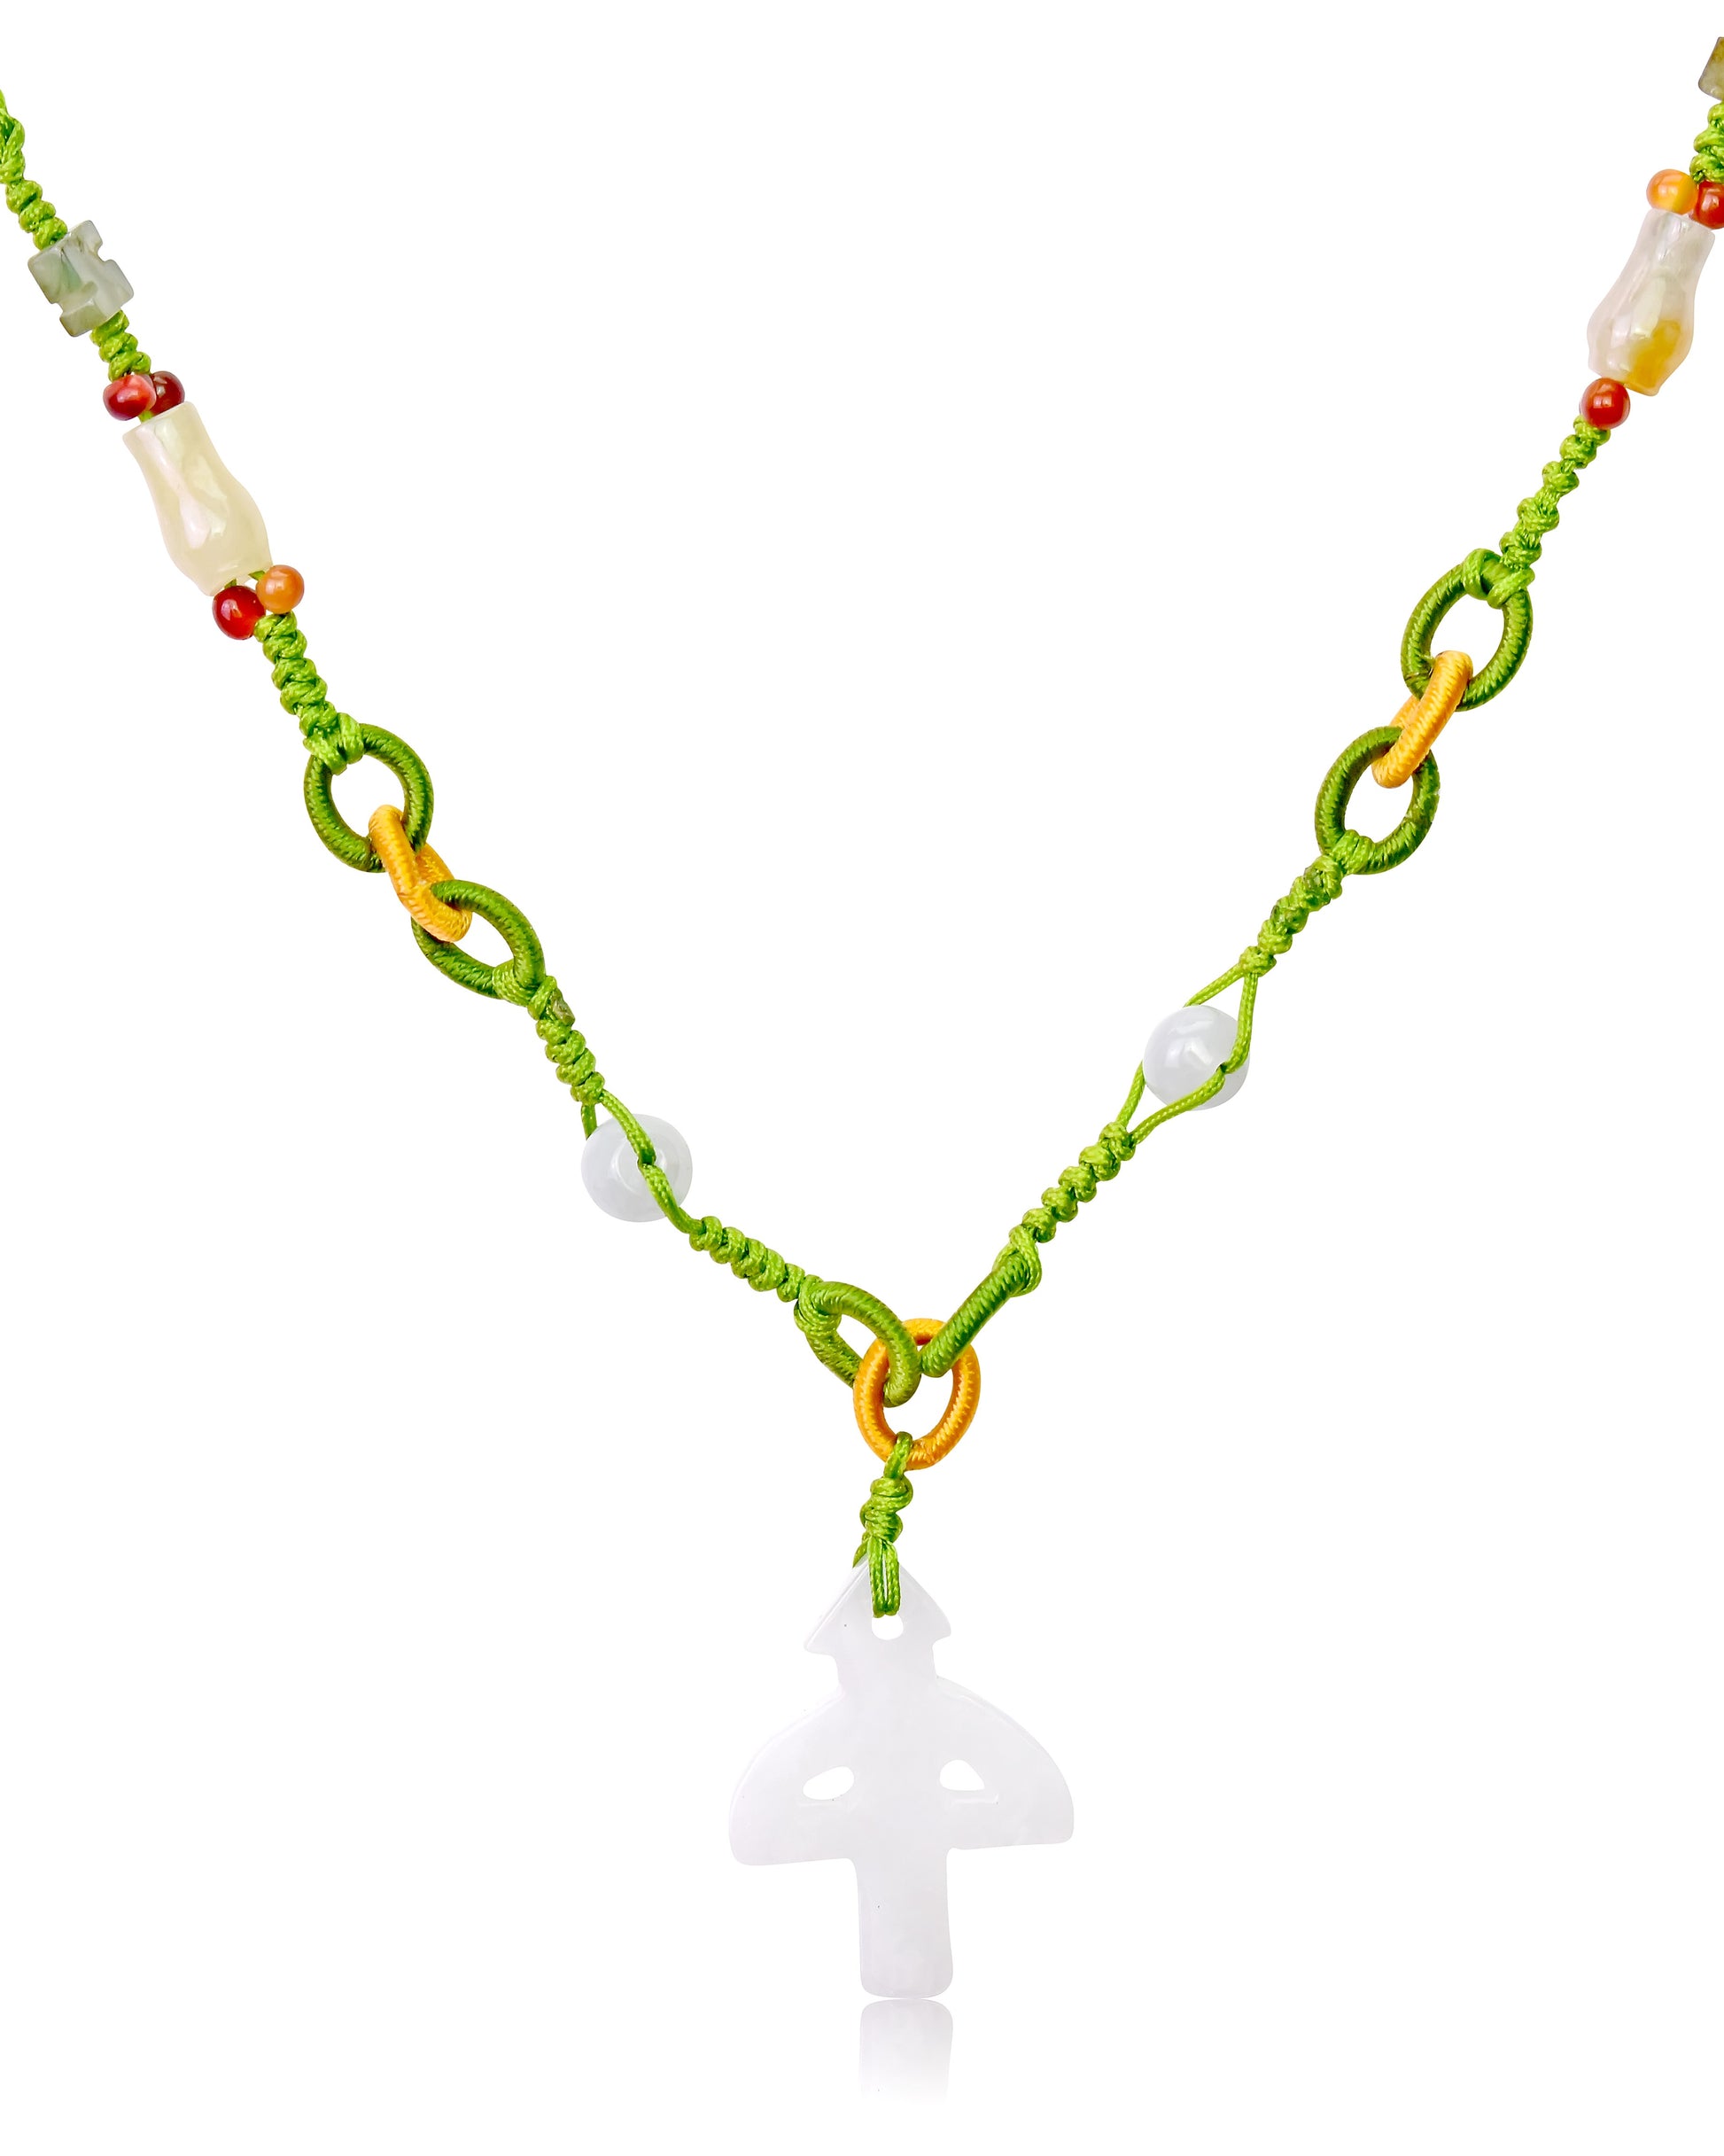 Let Your Sagittarius Side Shine with a Handmade Jade Necklace made with Lime Cord